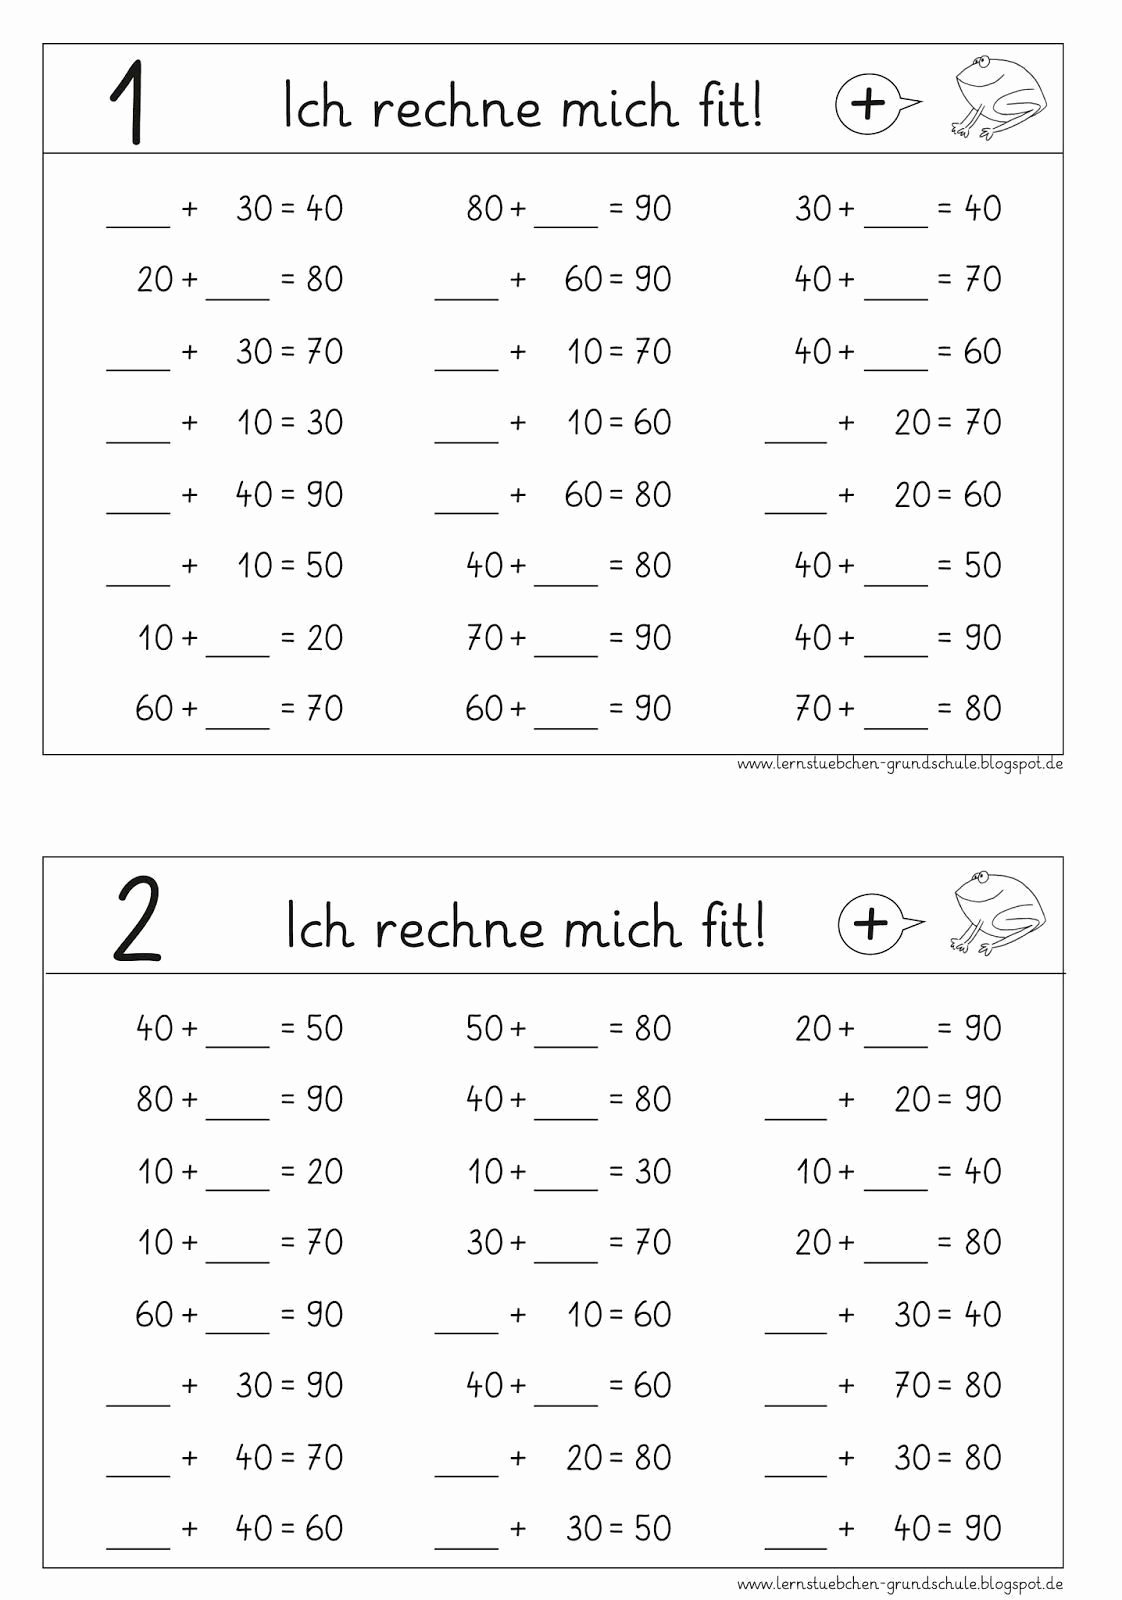 Russian Math Worksheets Best Of Russian Math Worksheets Here is the Next Set Cards From